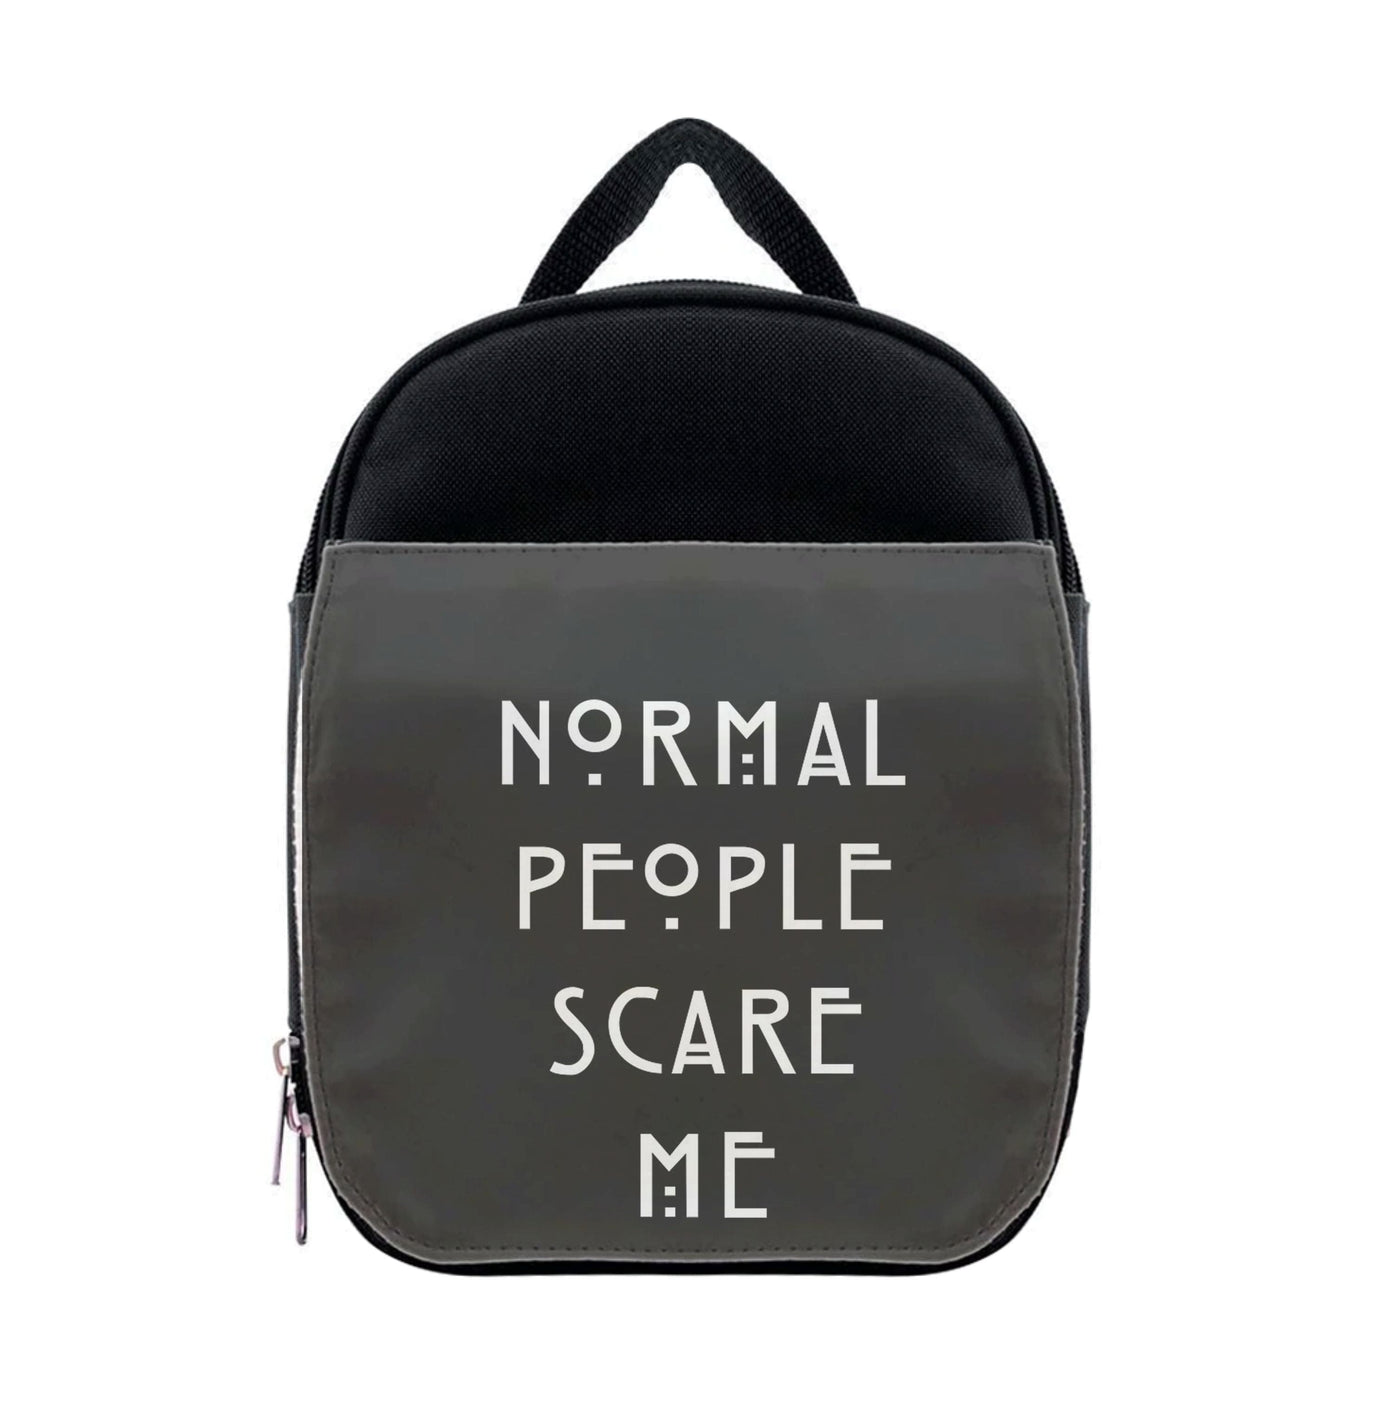 Normal People Scare Me - Black American Horror Story Lunchbox